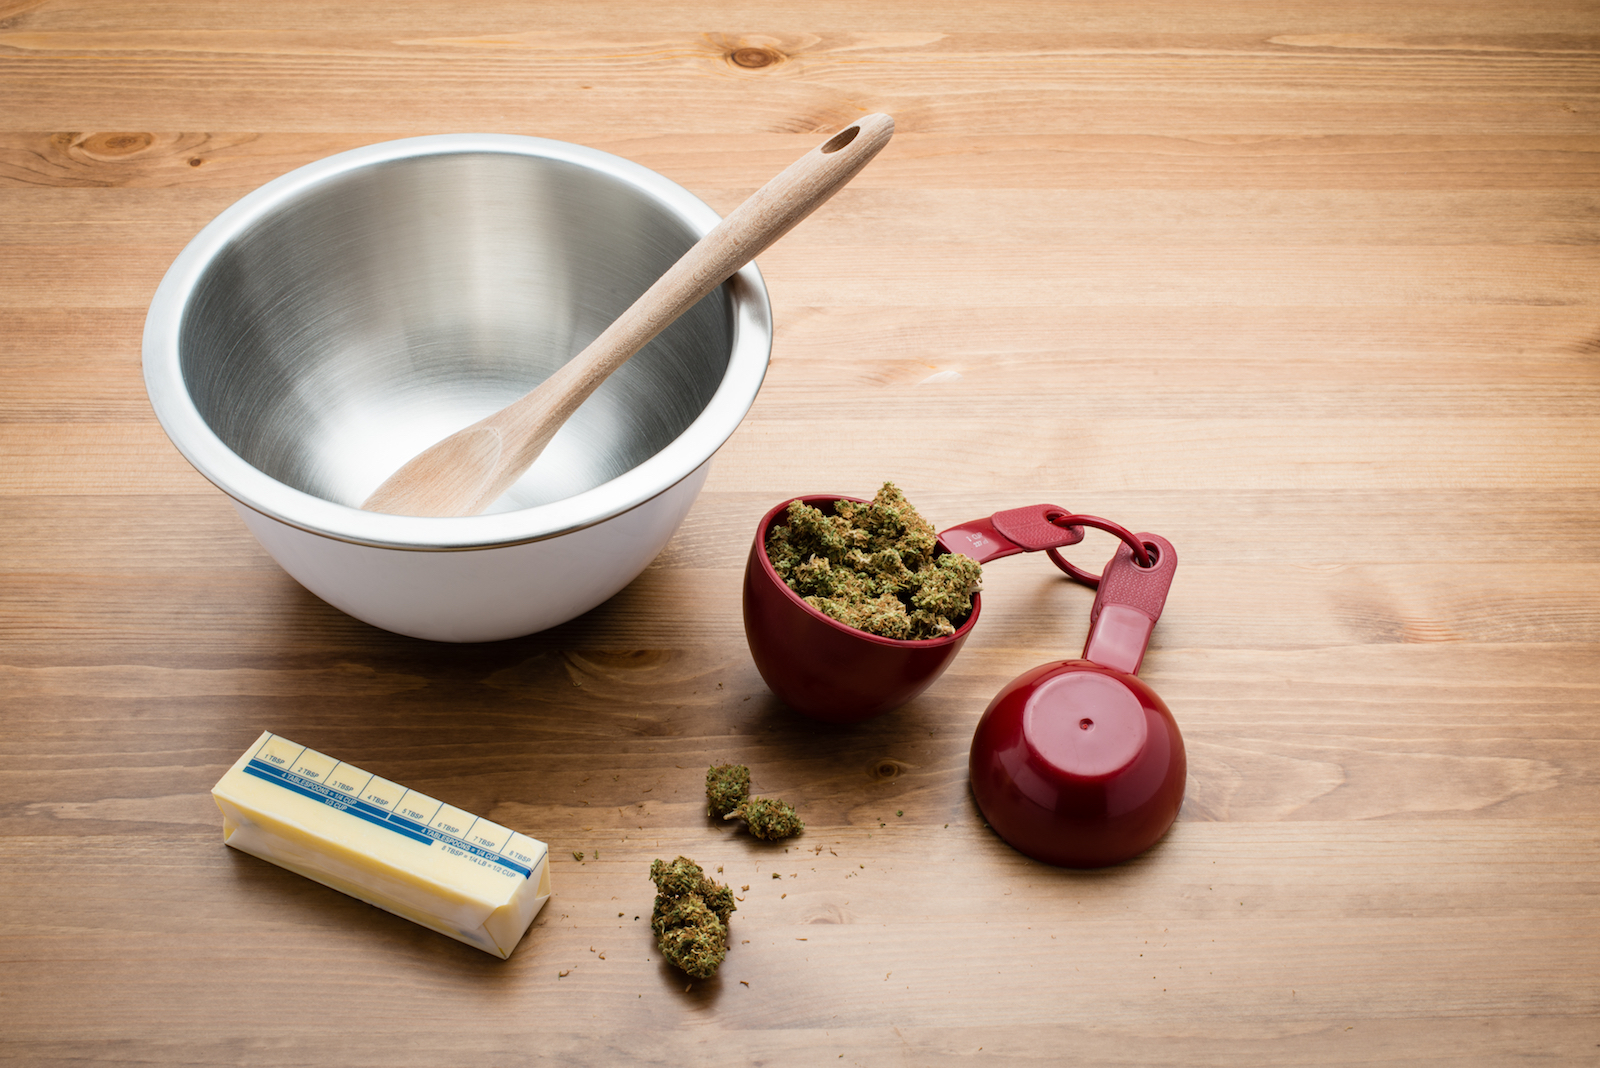 Edibles 101: How to Cook with Cannabis in 7 Easy Steps